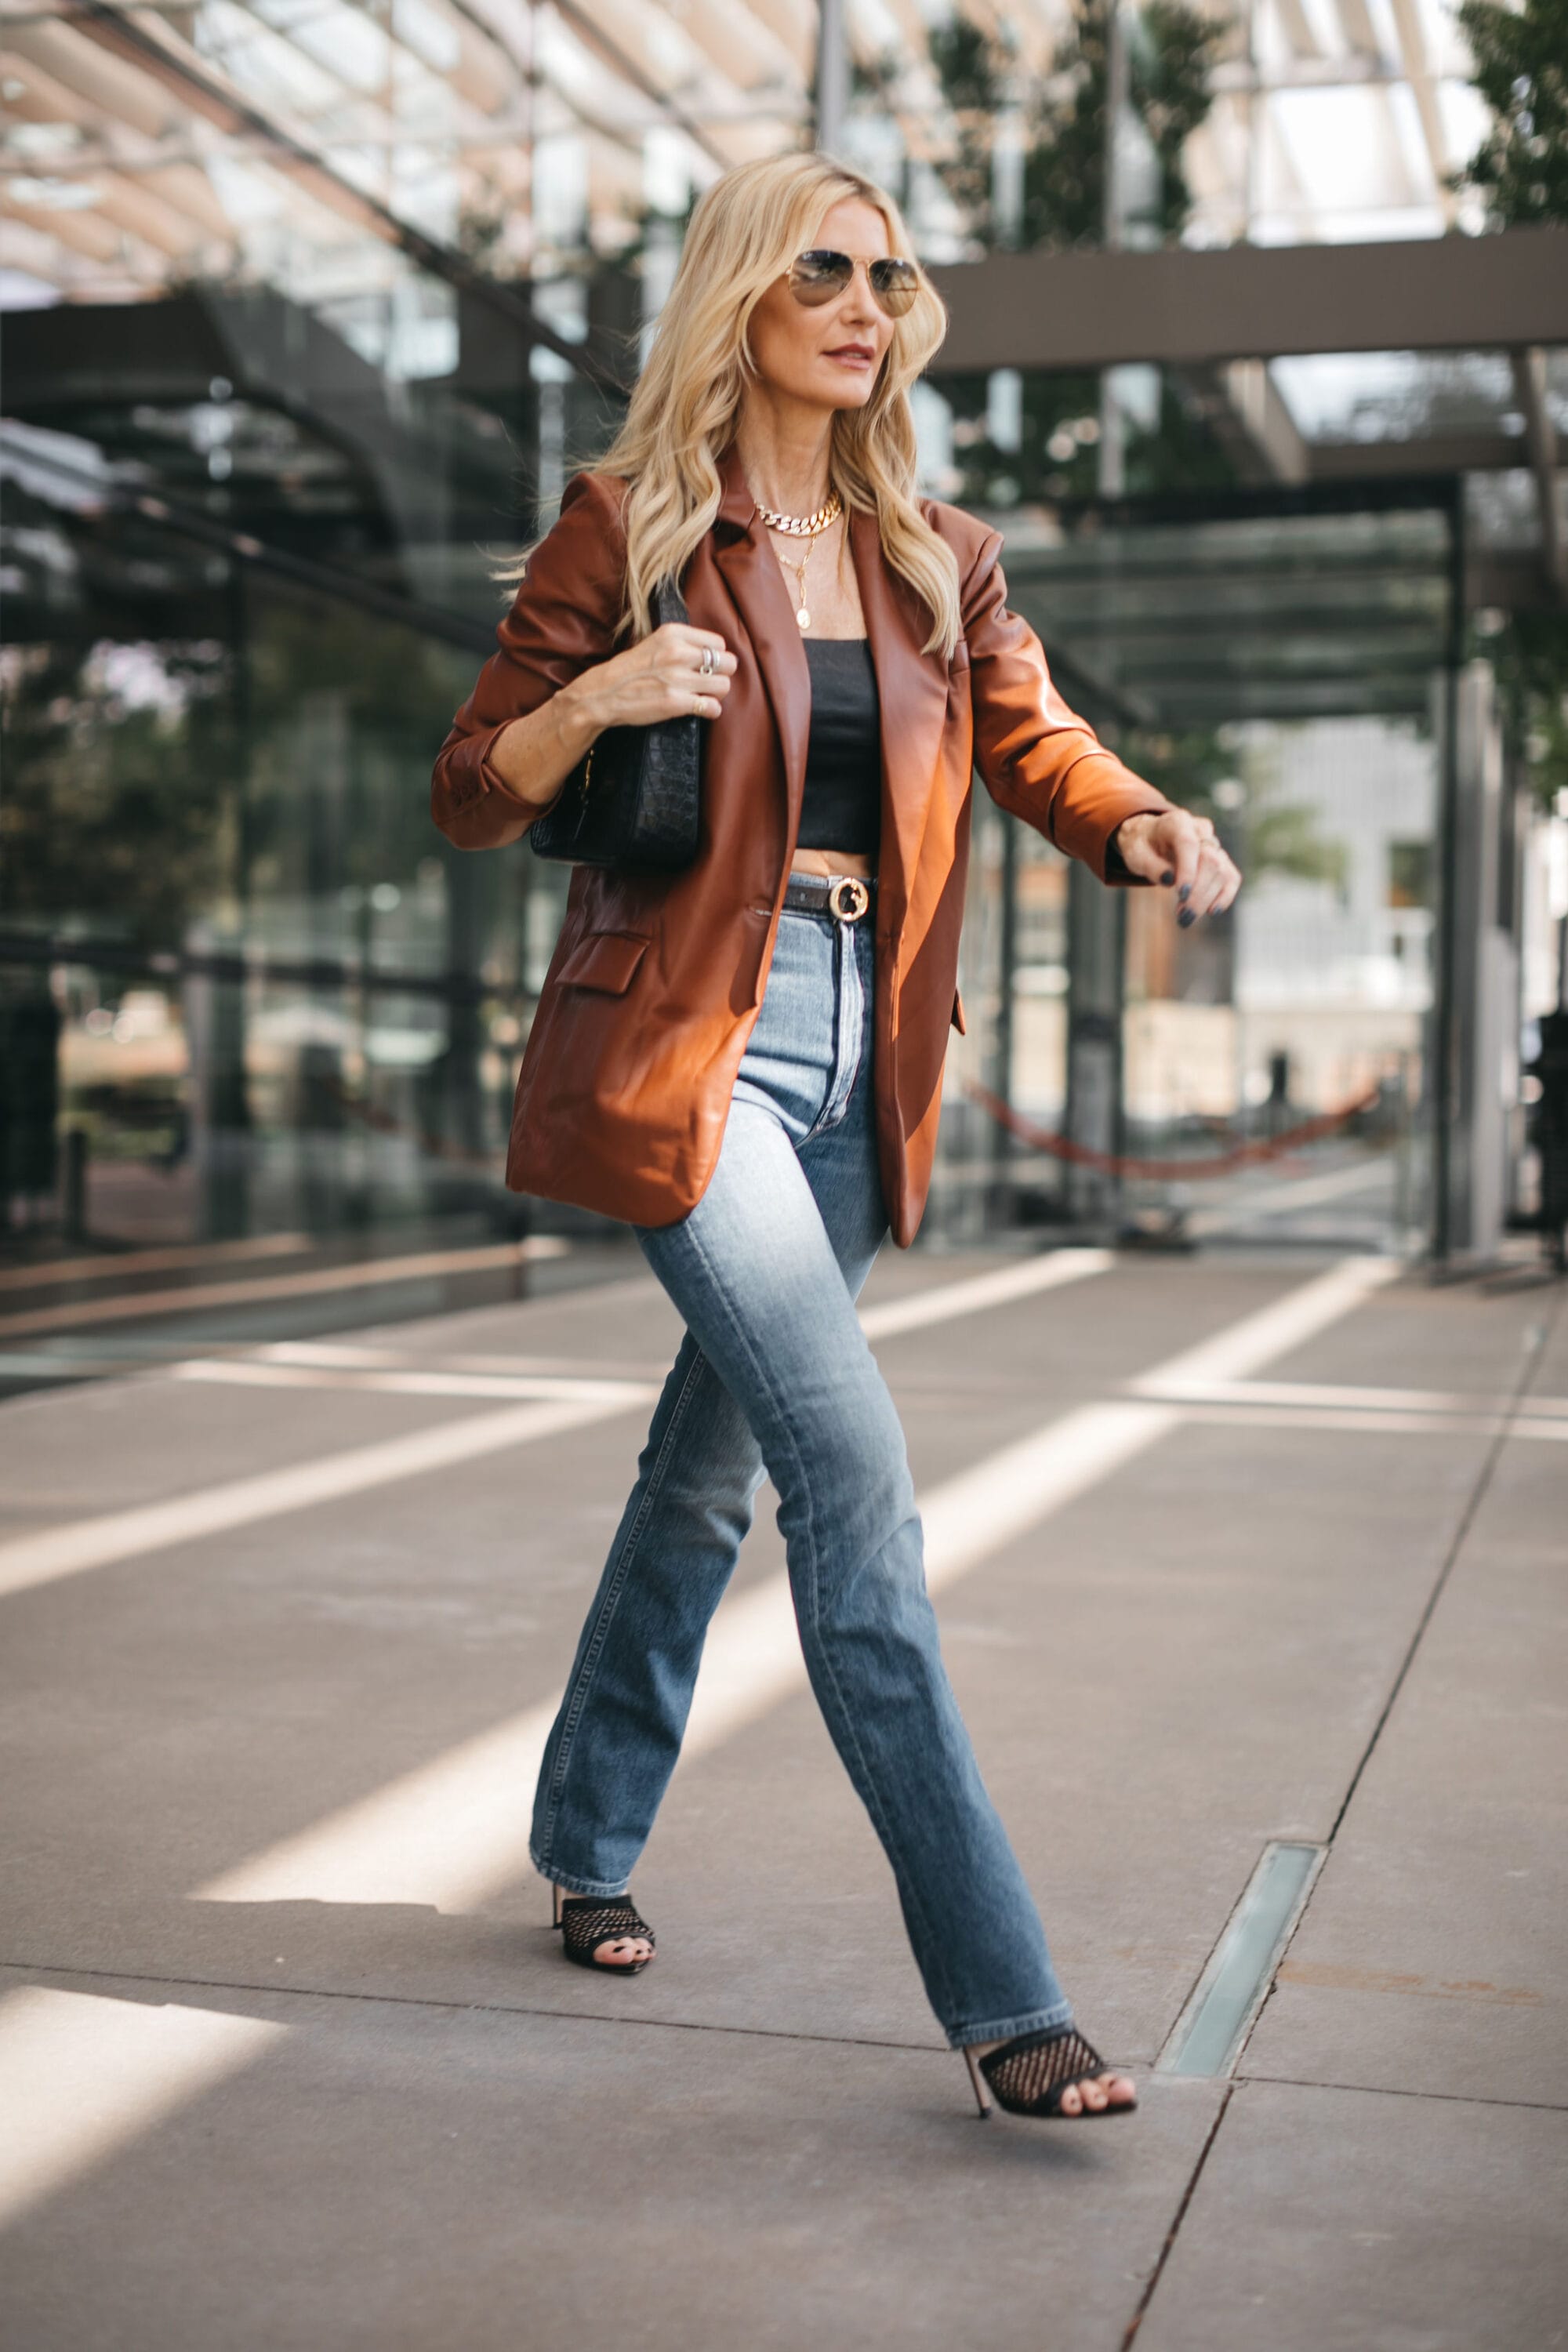 Over 40 fashion blogger wearing oversized faux leather blazer as one of the best winter jackets your wardrobe needs.